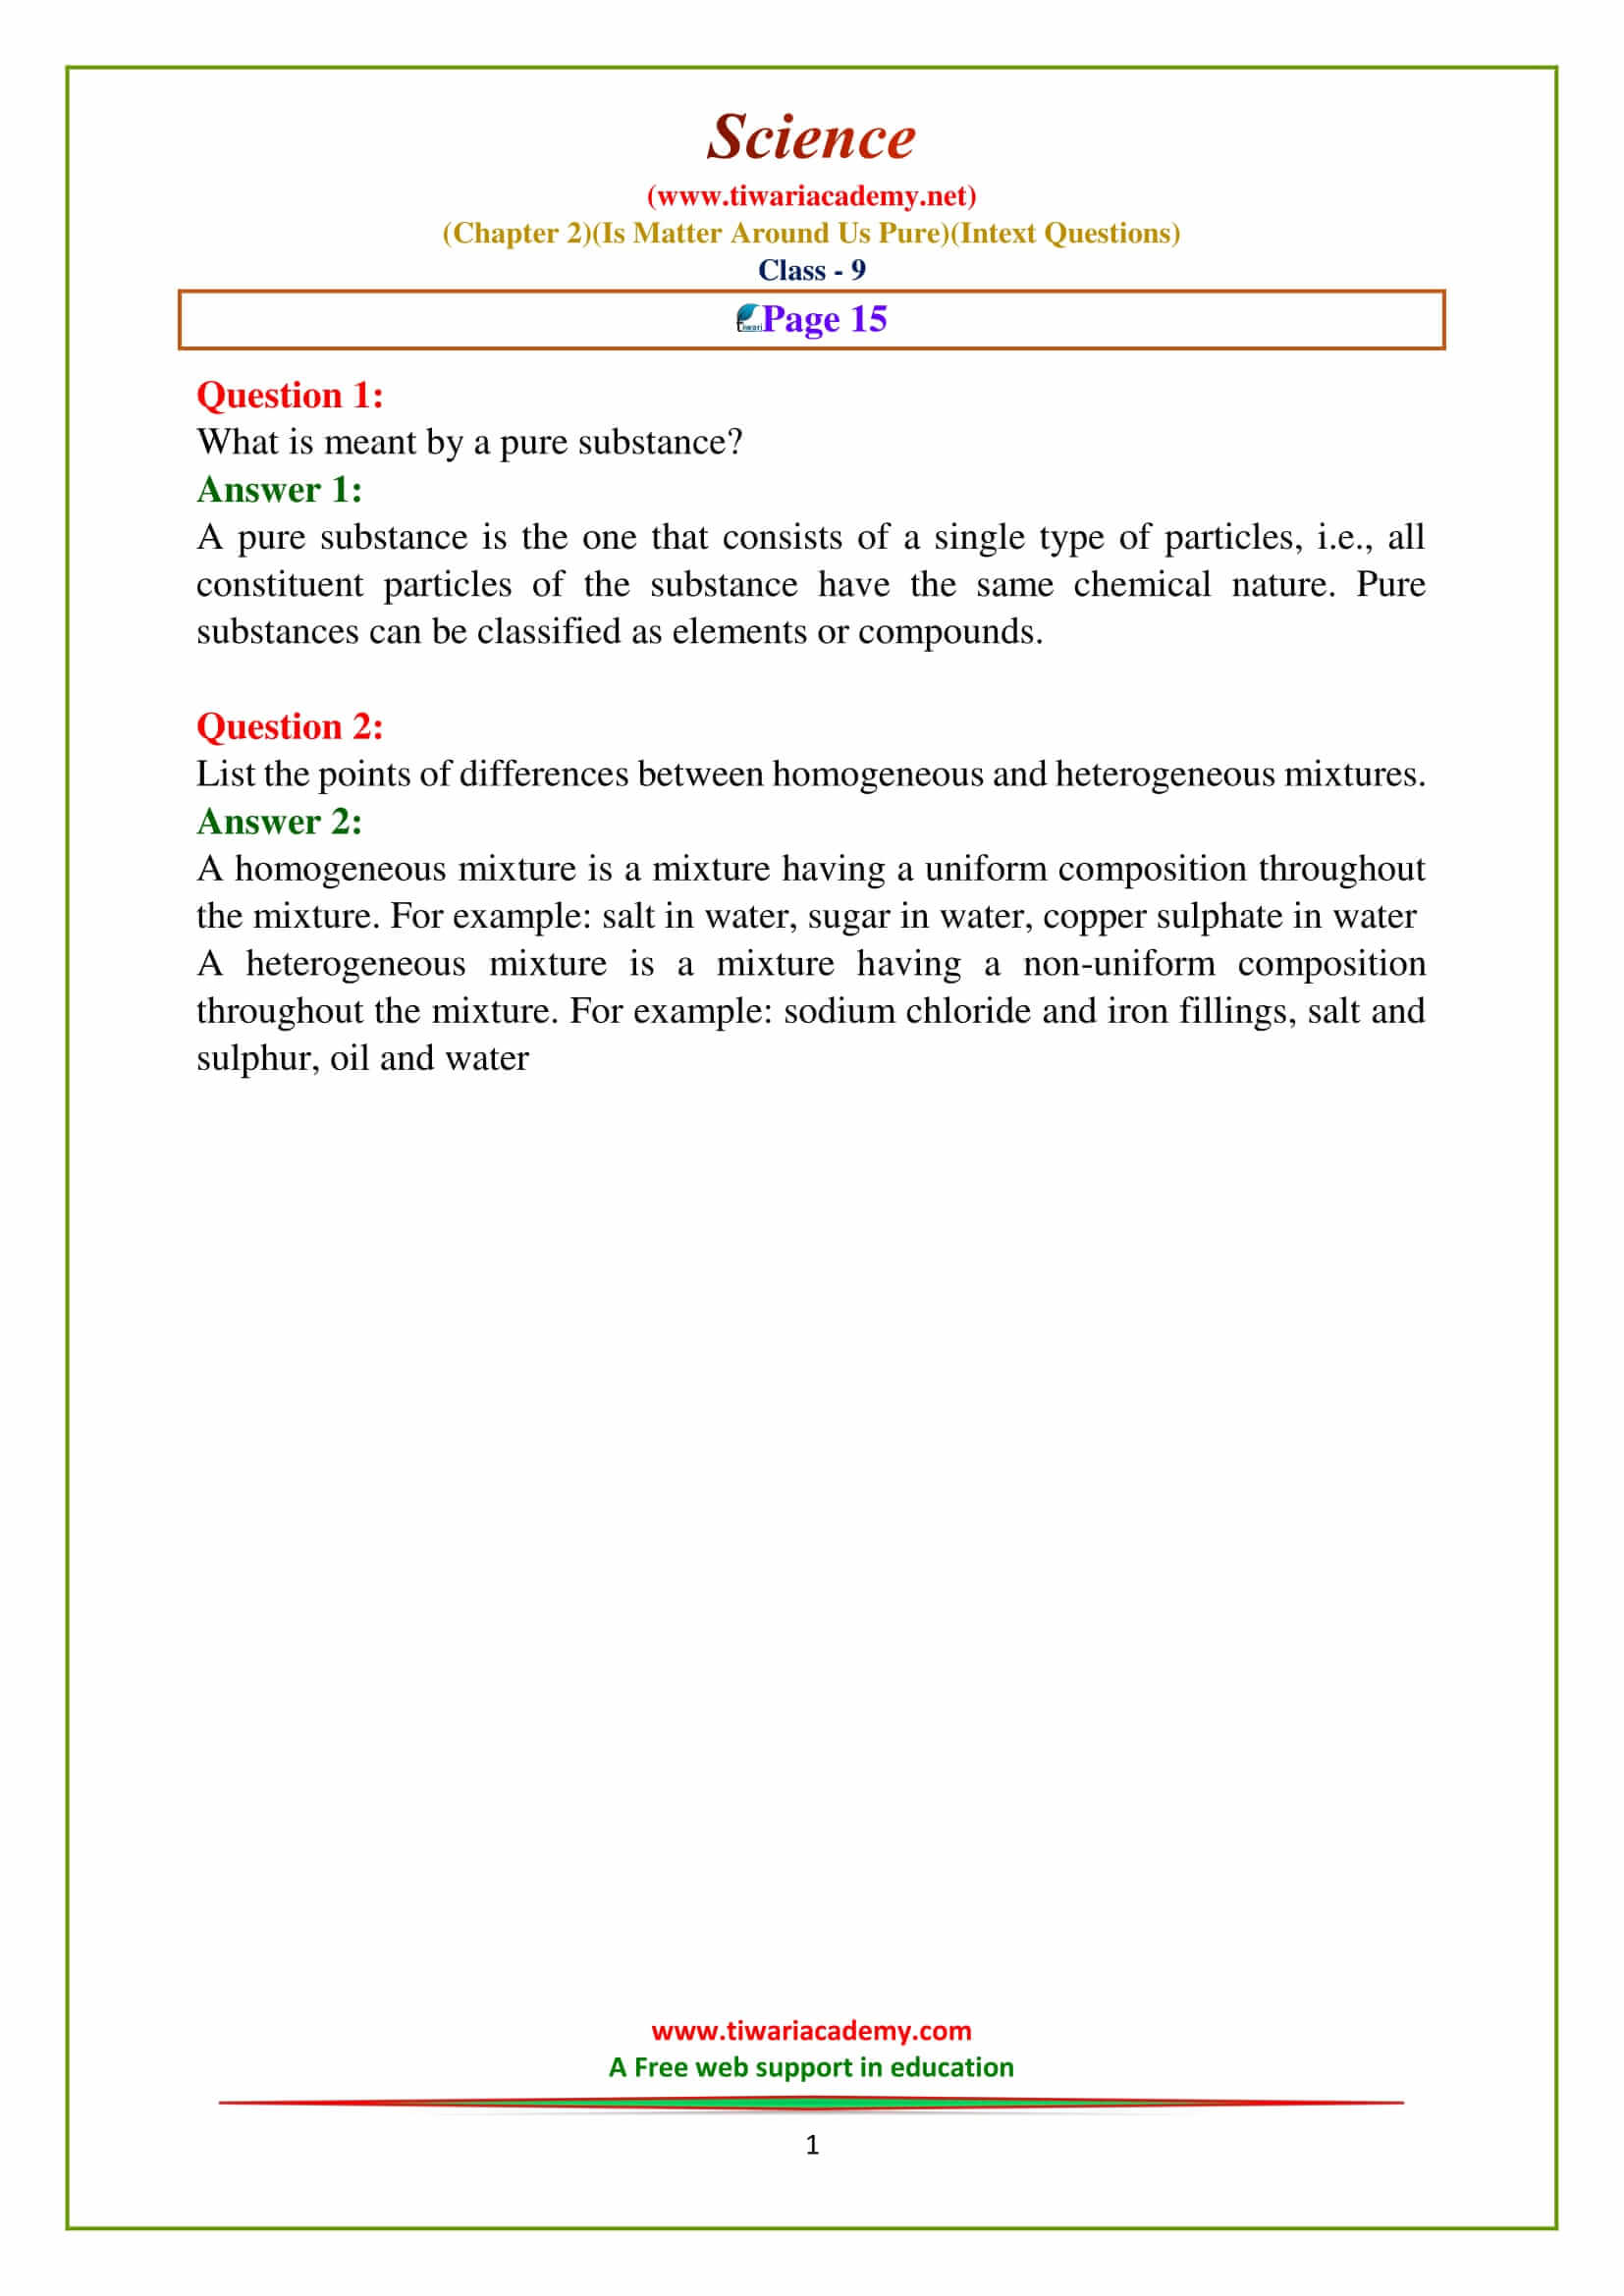 NCERT Solutions for Class 9 Science Chapter 2 Is Matter Around Us Pure page 15 questions answres